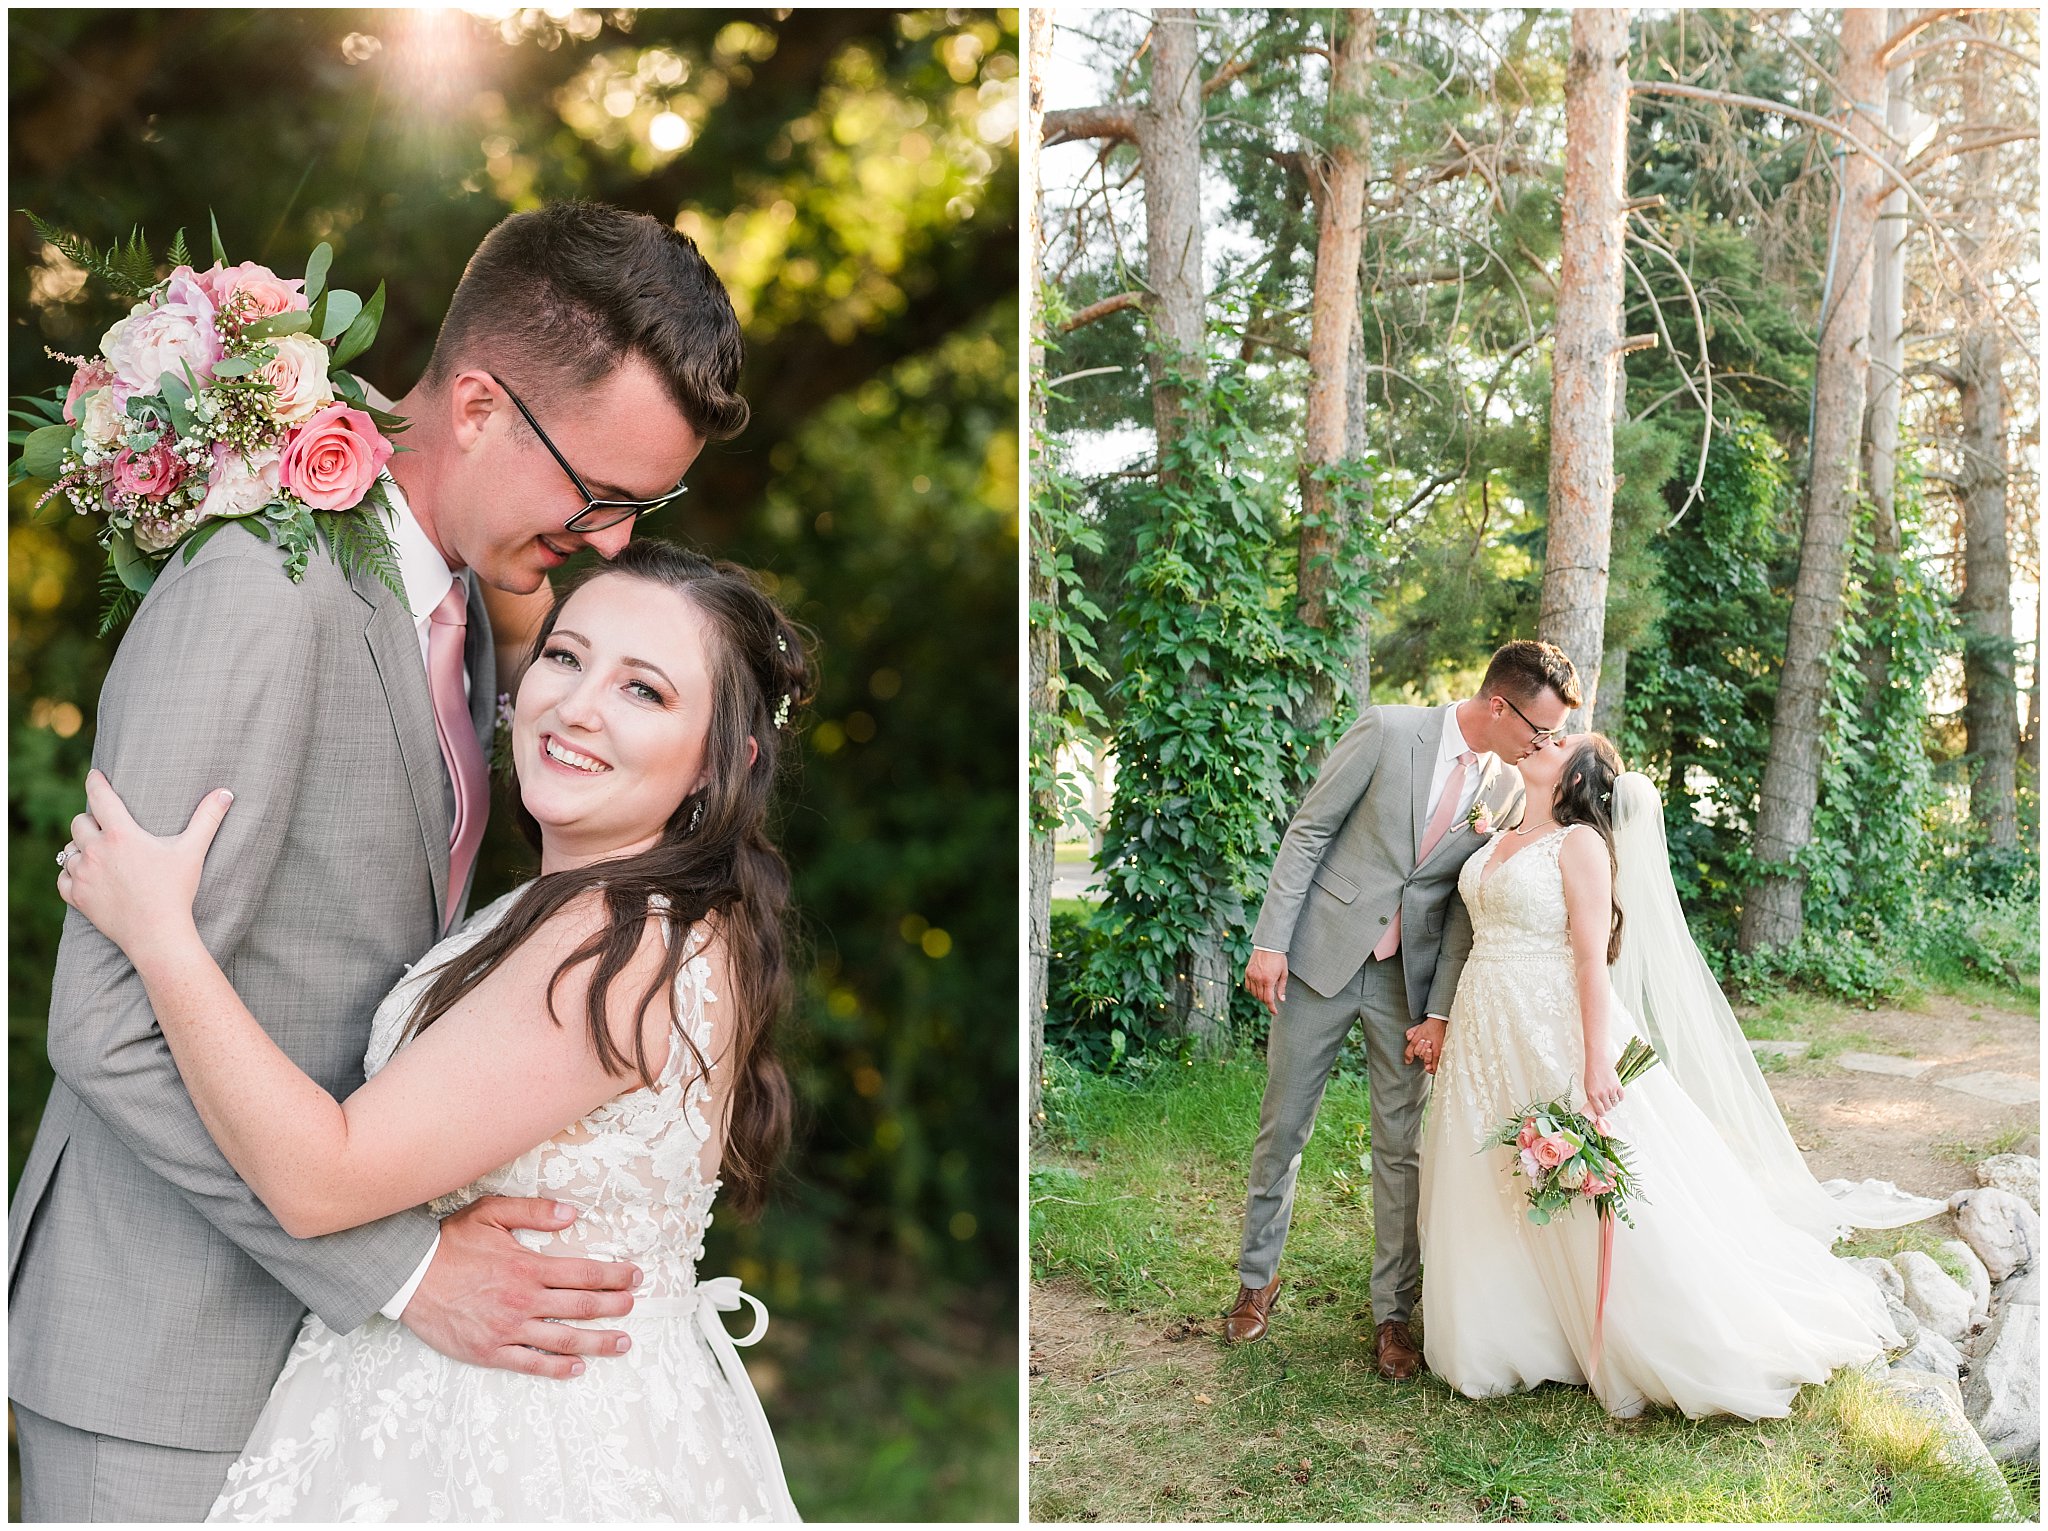 Bride and groom portraits in vines and lodge pole pines | Oak Hills Utah Dusty Rose and Gray Summer Wedding | Jessie and Dallin Photography